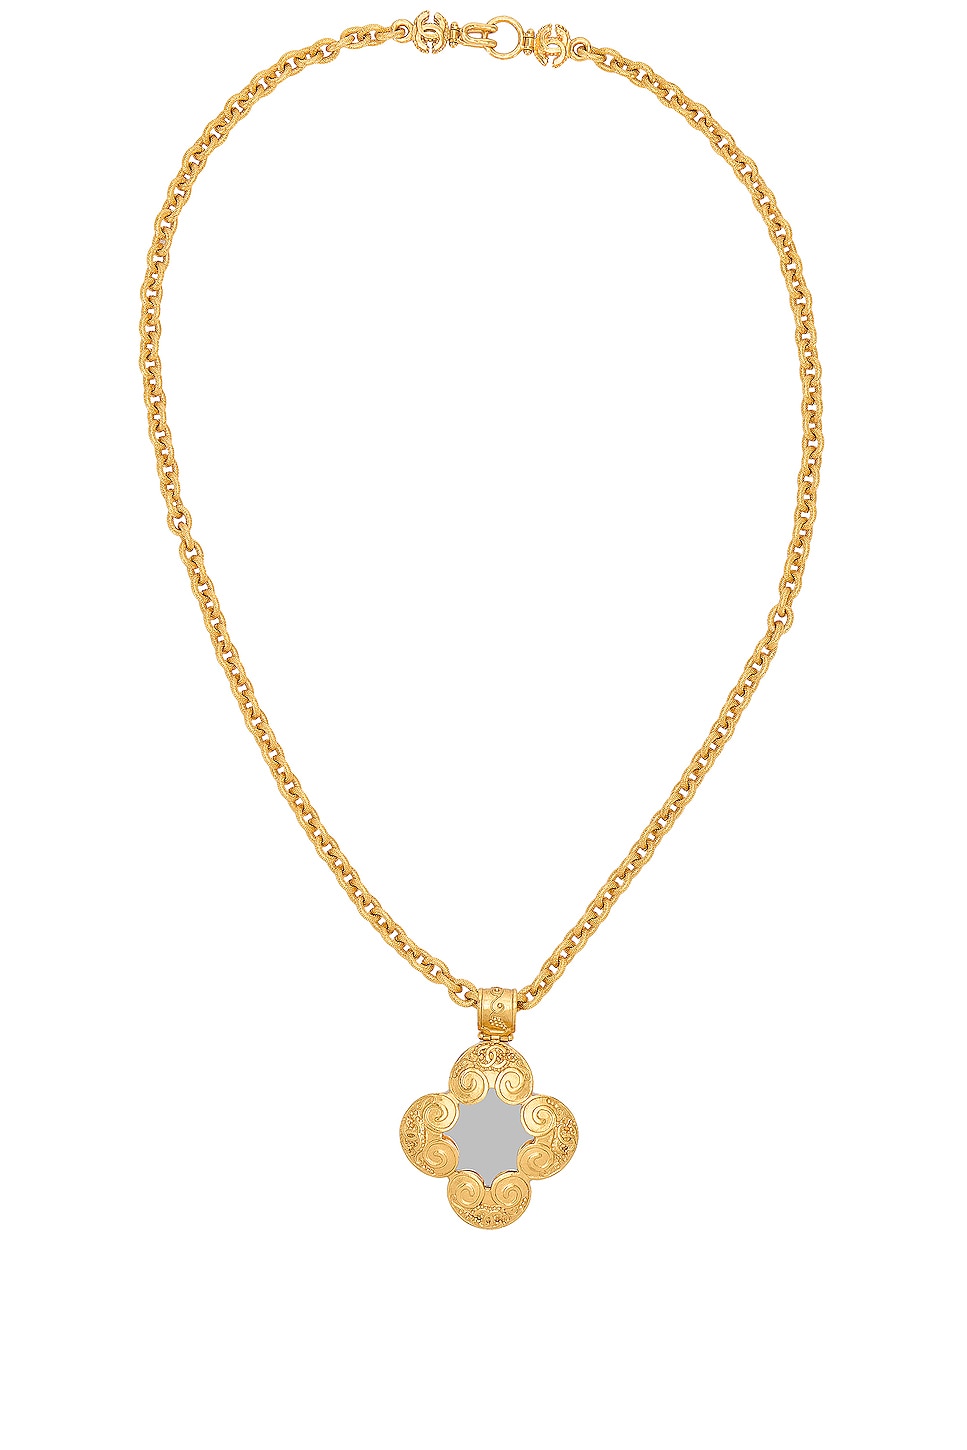 Image 1 of FWRD Renew Chanel Mirror Necklace in Gold